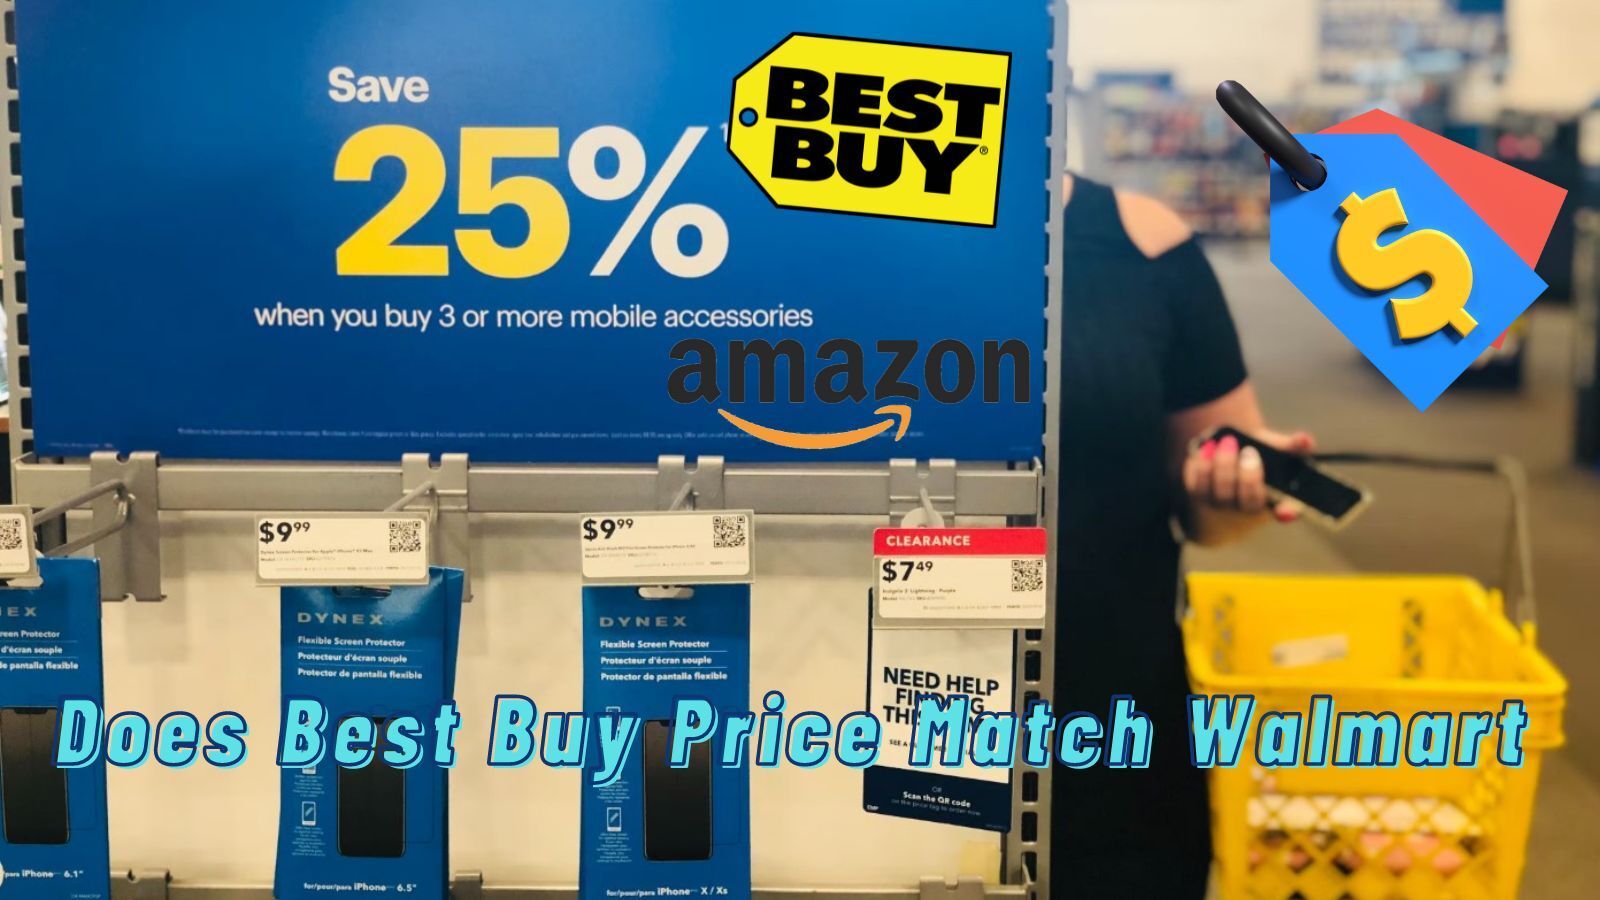 Does Best Buy Price Match Walmart? (Things You Need to Know)